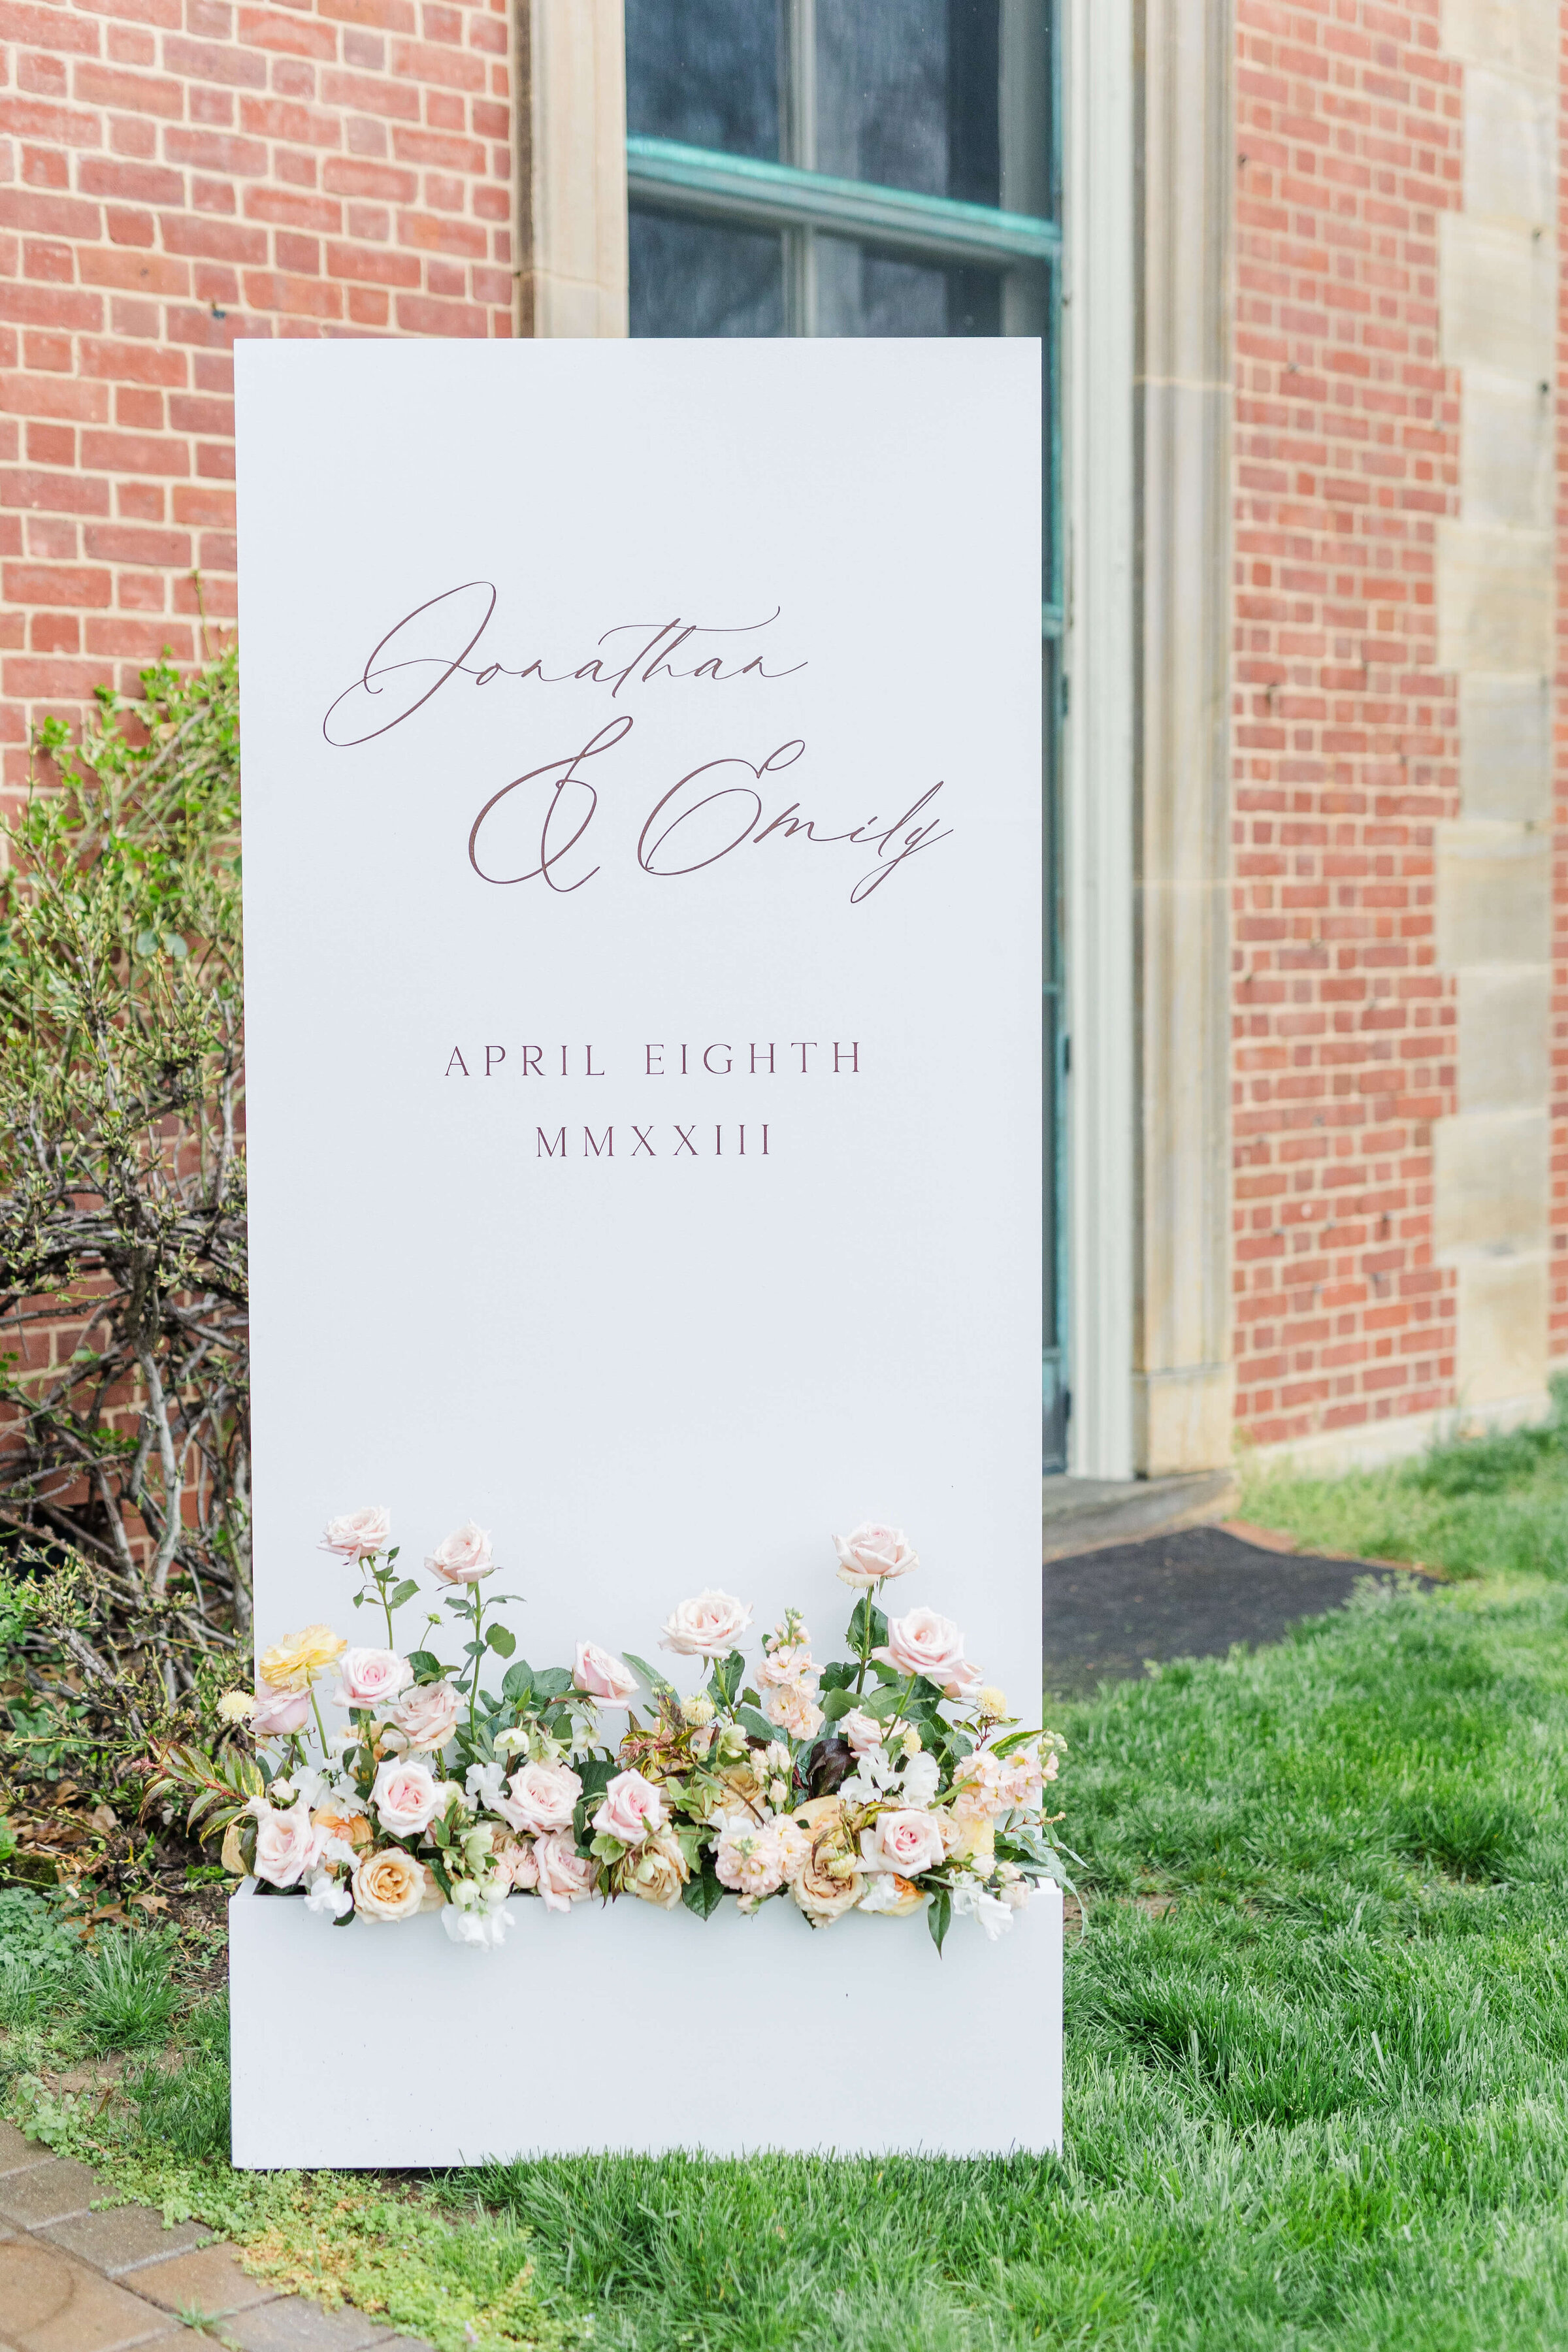 A wedding sign that says the bride and groom's name with their wedding date and wedding florals on the bottom of the sign